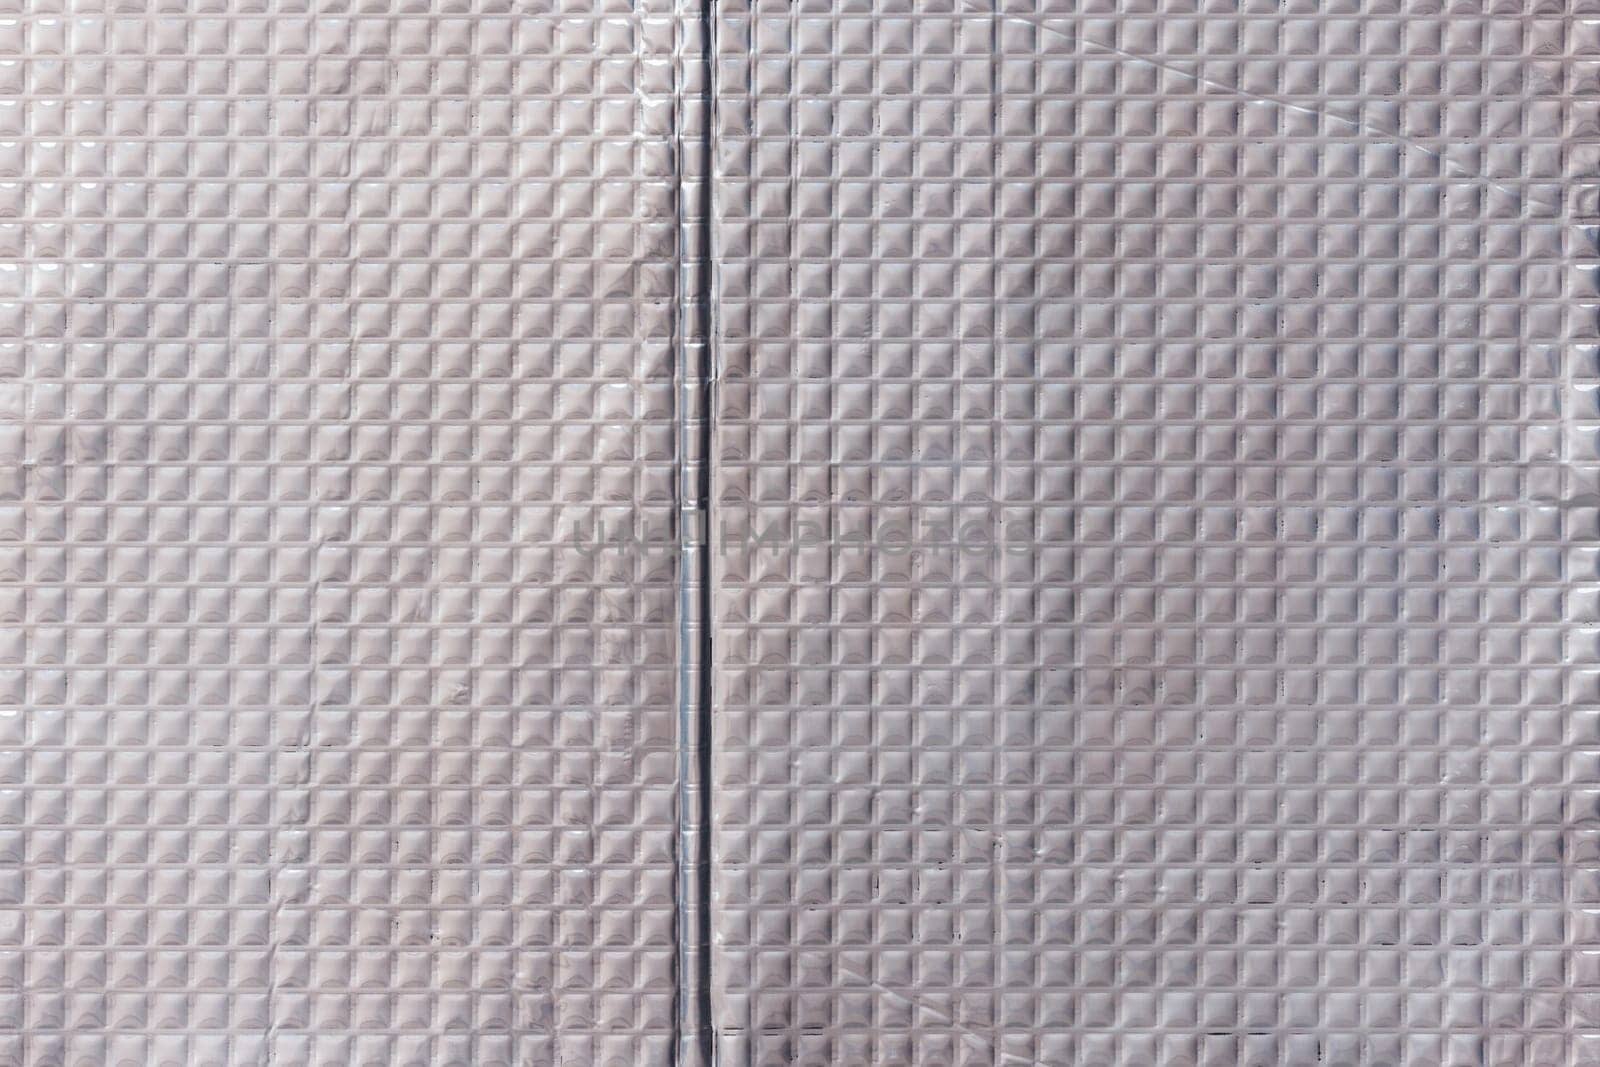 Full-frame texture of aluminum coated butil rubber sheet with square pattern. This material is used for sound dampening in car interiors and vibration resonance reducing and acoustic improving.